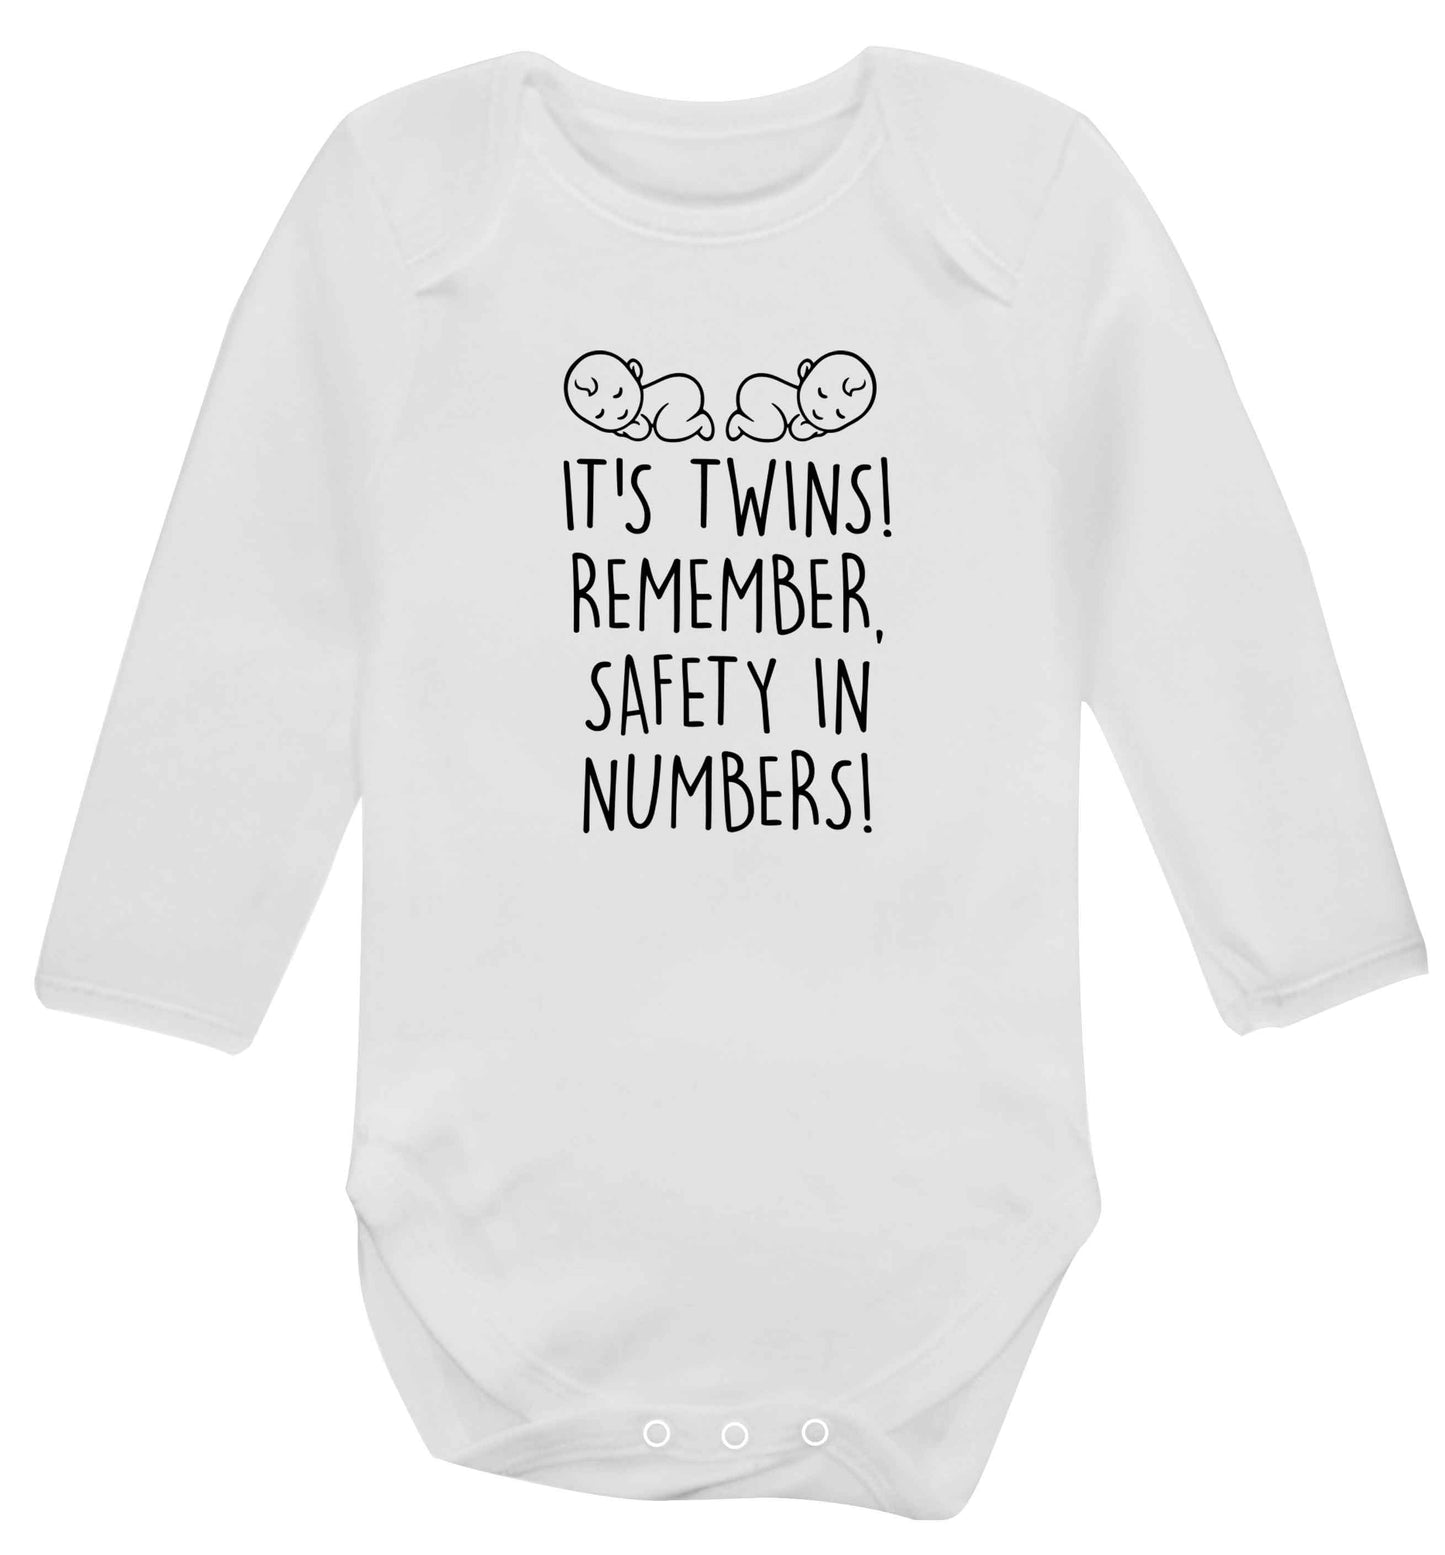 It's twins! Remember safety in numbers! baby vest long sleeved white 6-12 months